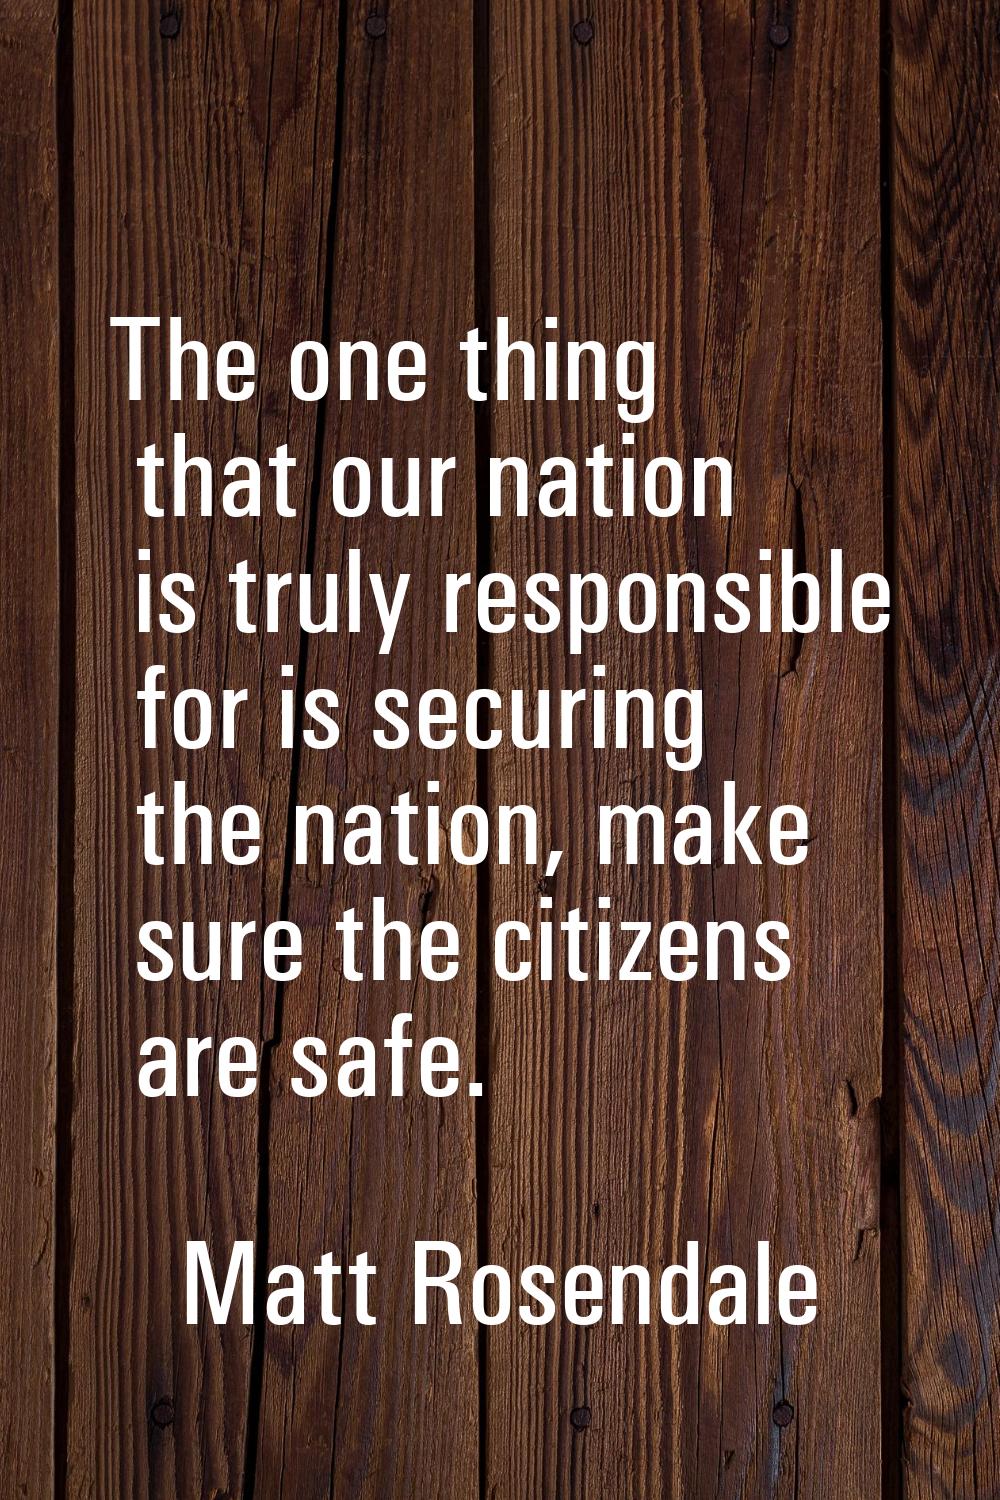 The one thing that our nation is truly responsible for is securing the nation, make sure the citize